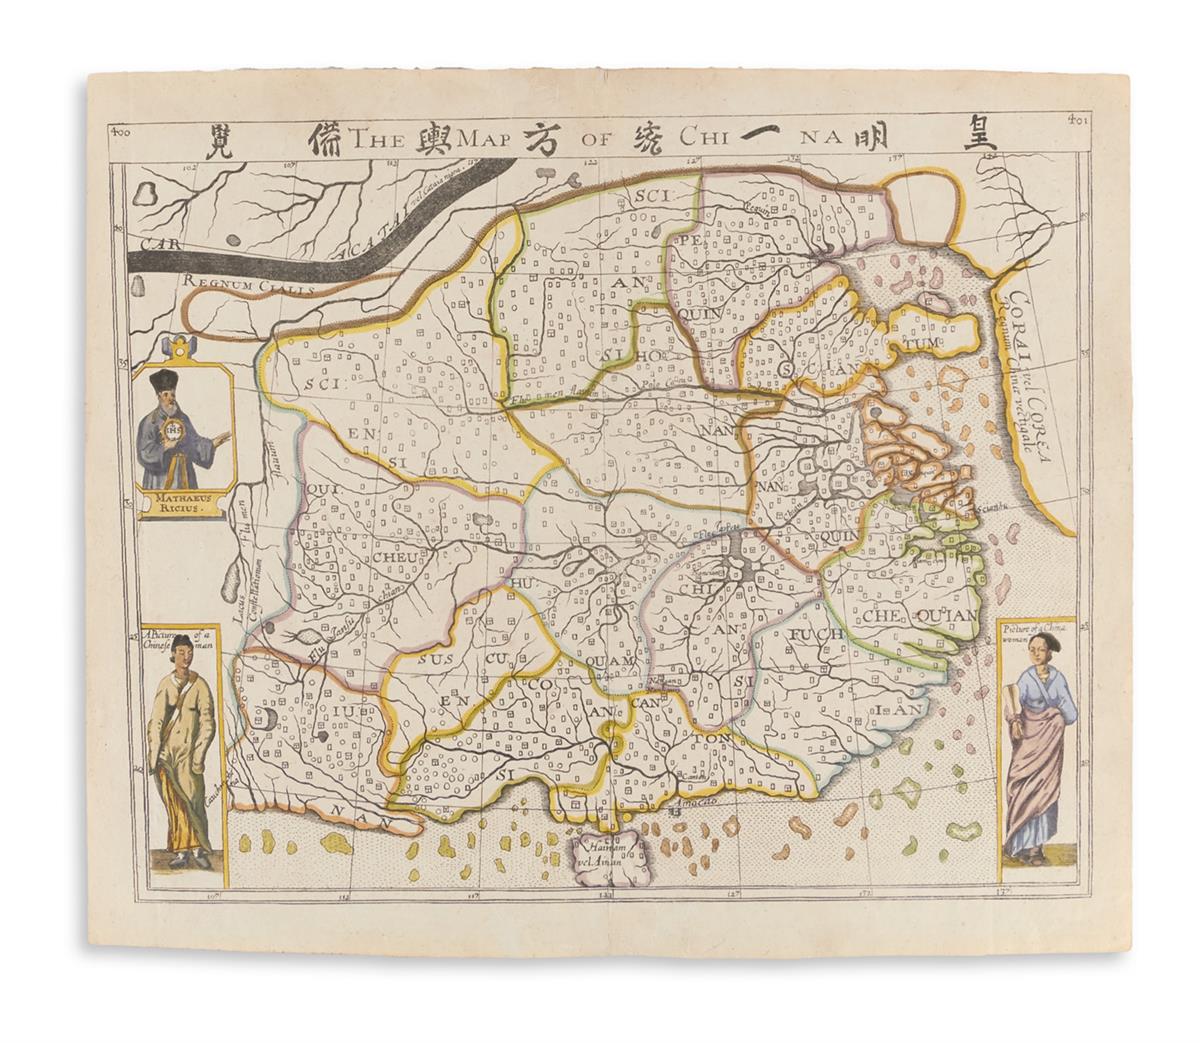 PURCHAS, SAMUEL. The Map of China.